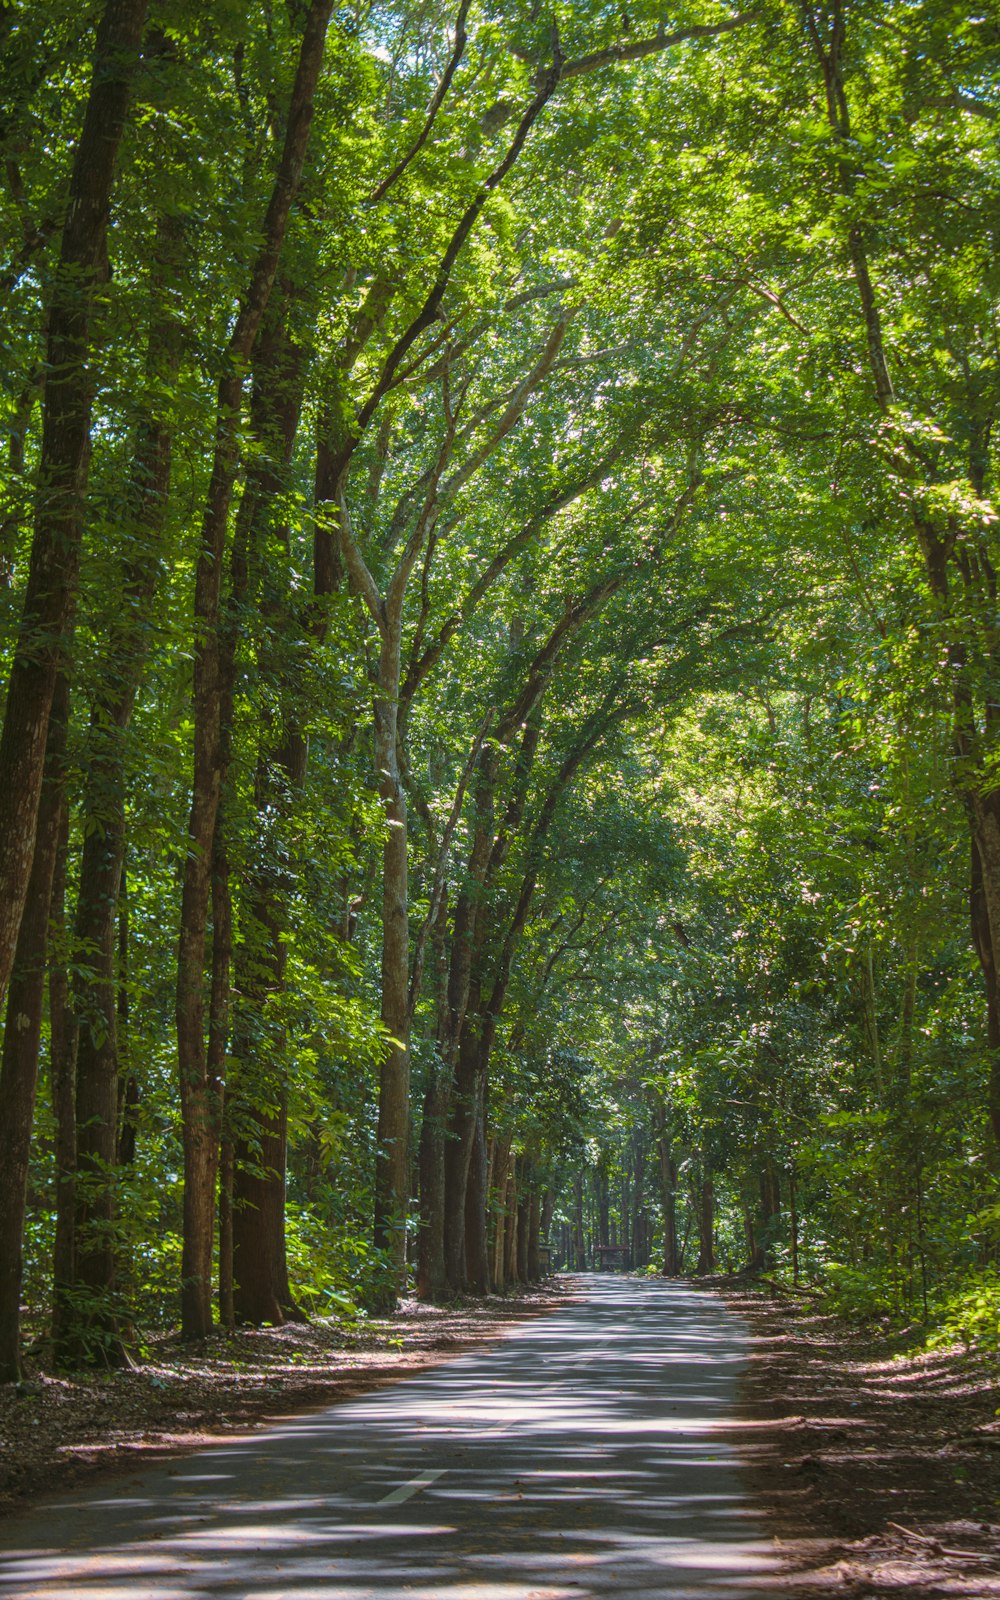 a road lined with trees and leaves in the middle of a forest